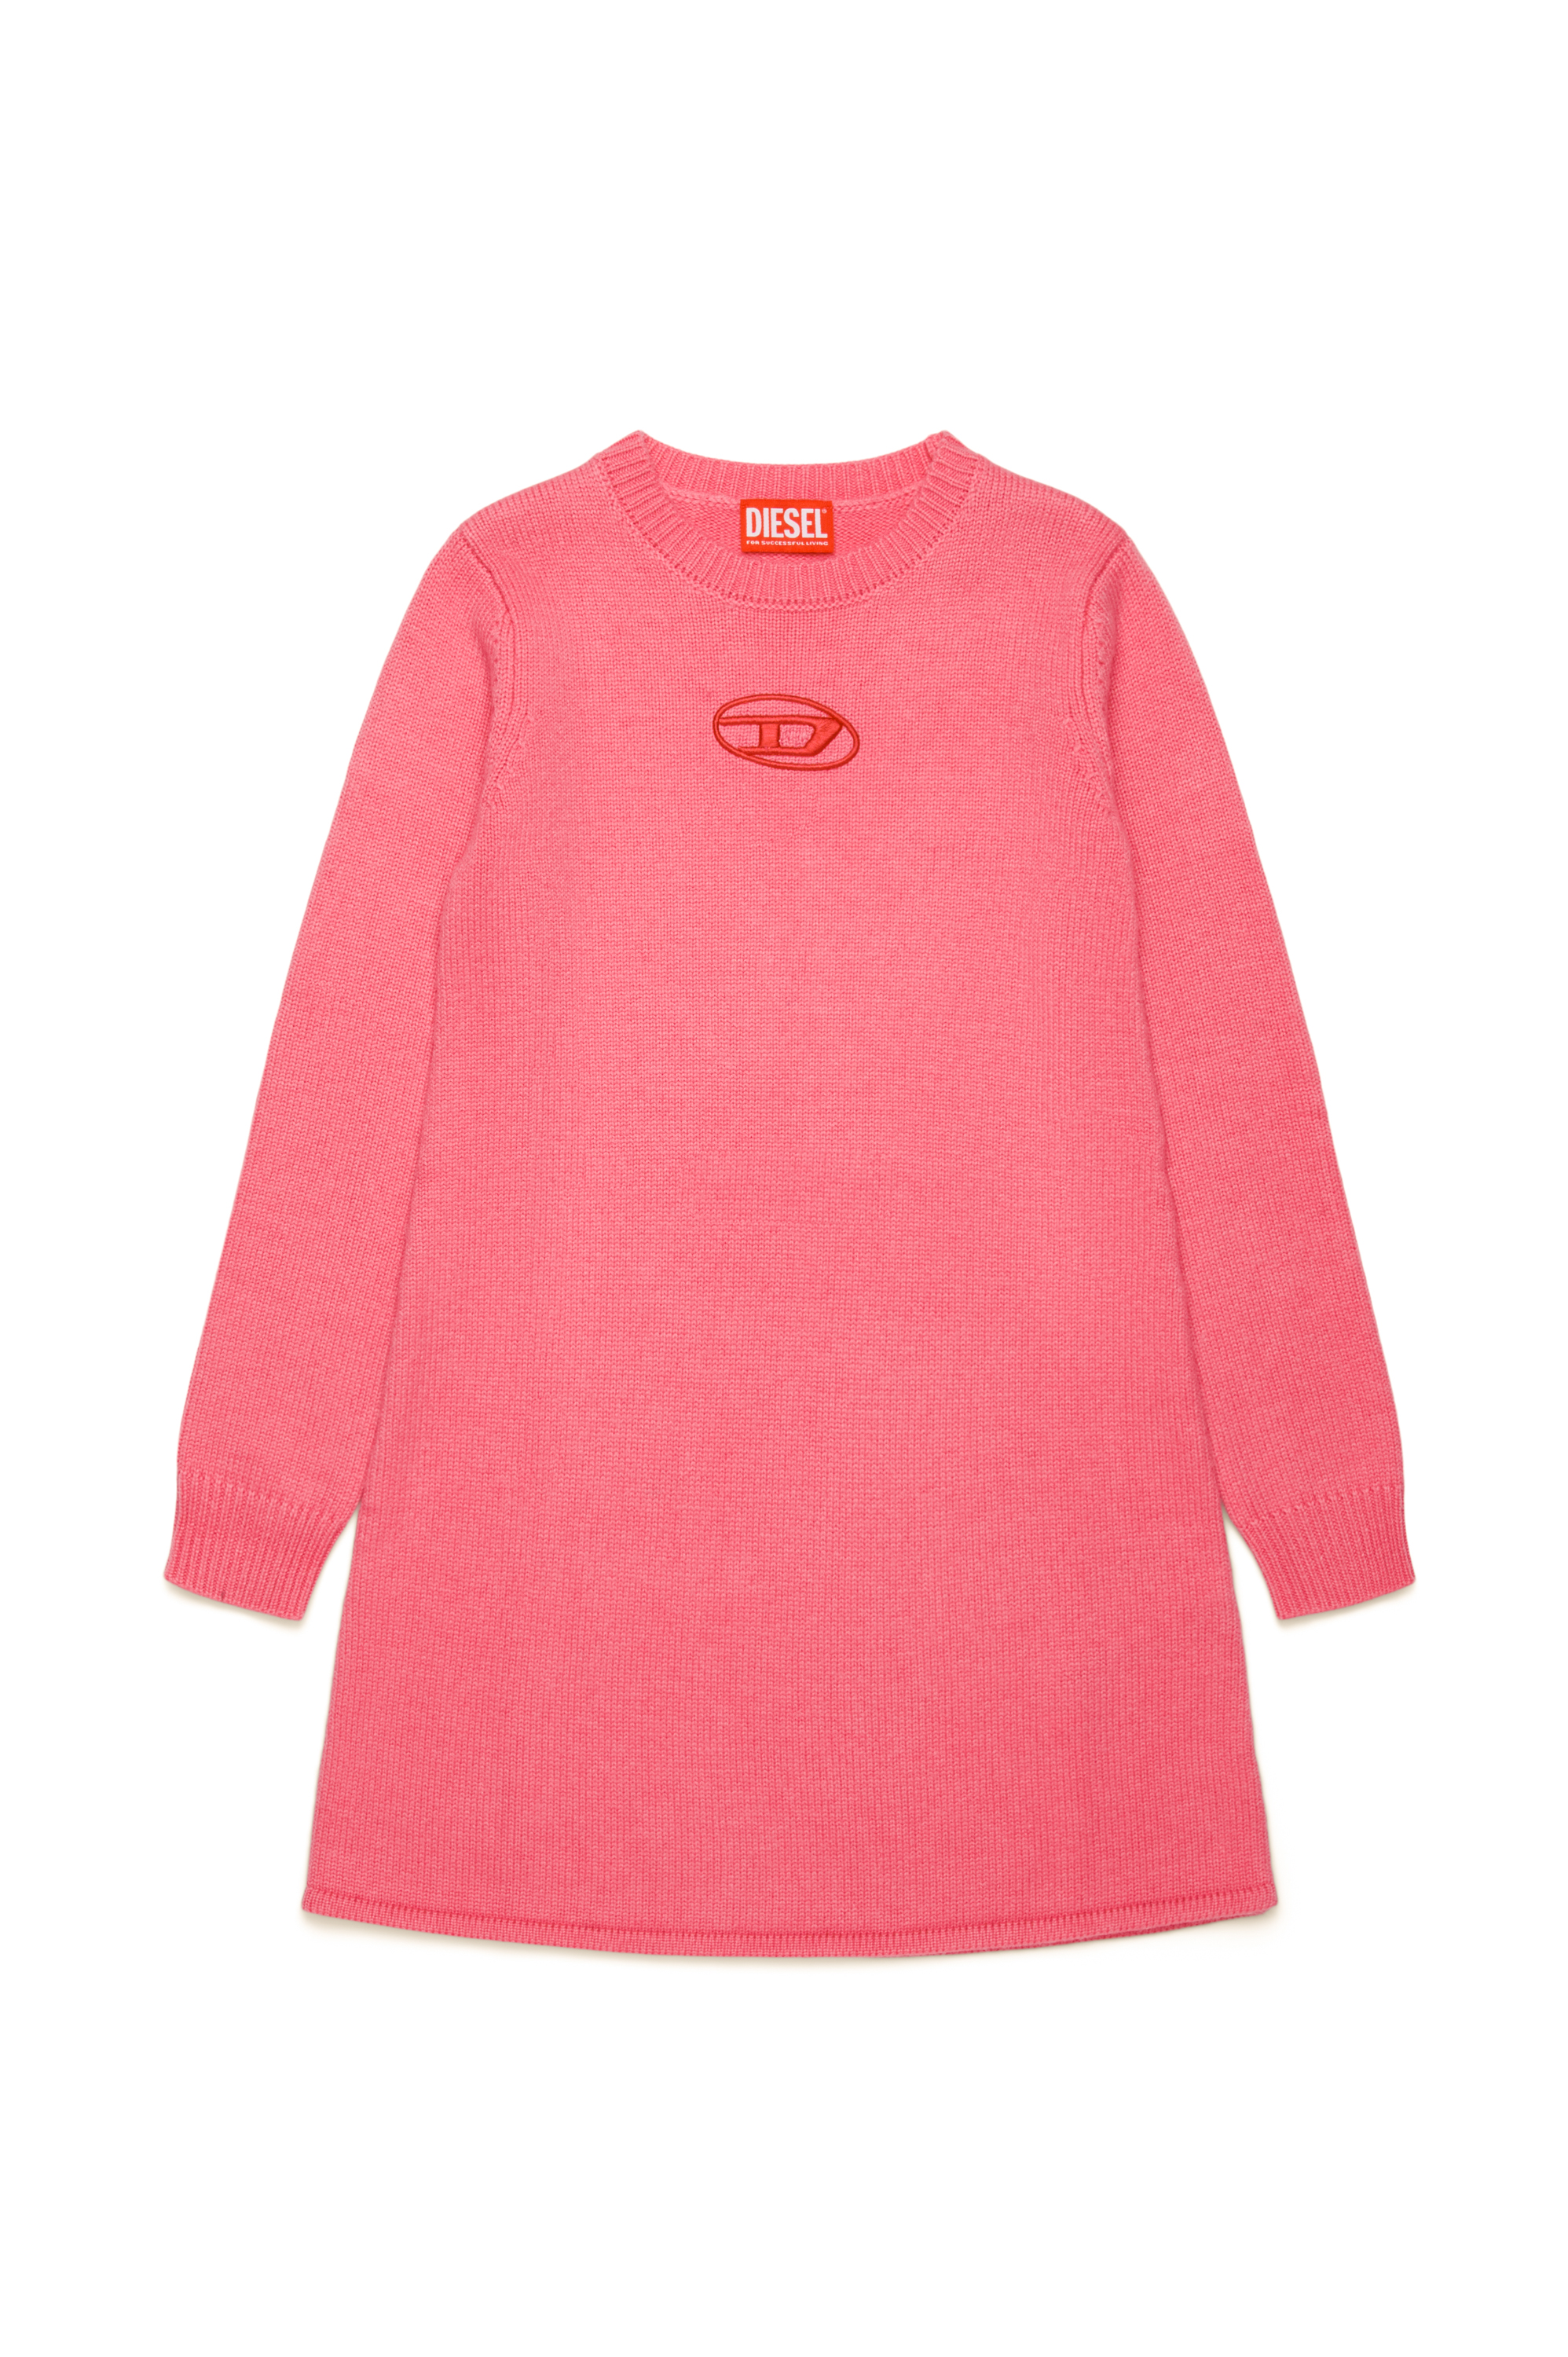 Diesel - DGANDIE, Woman Dress in cashmere-enriched knit in Pink - Image 1